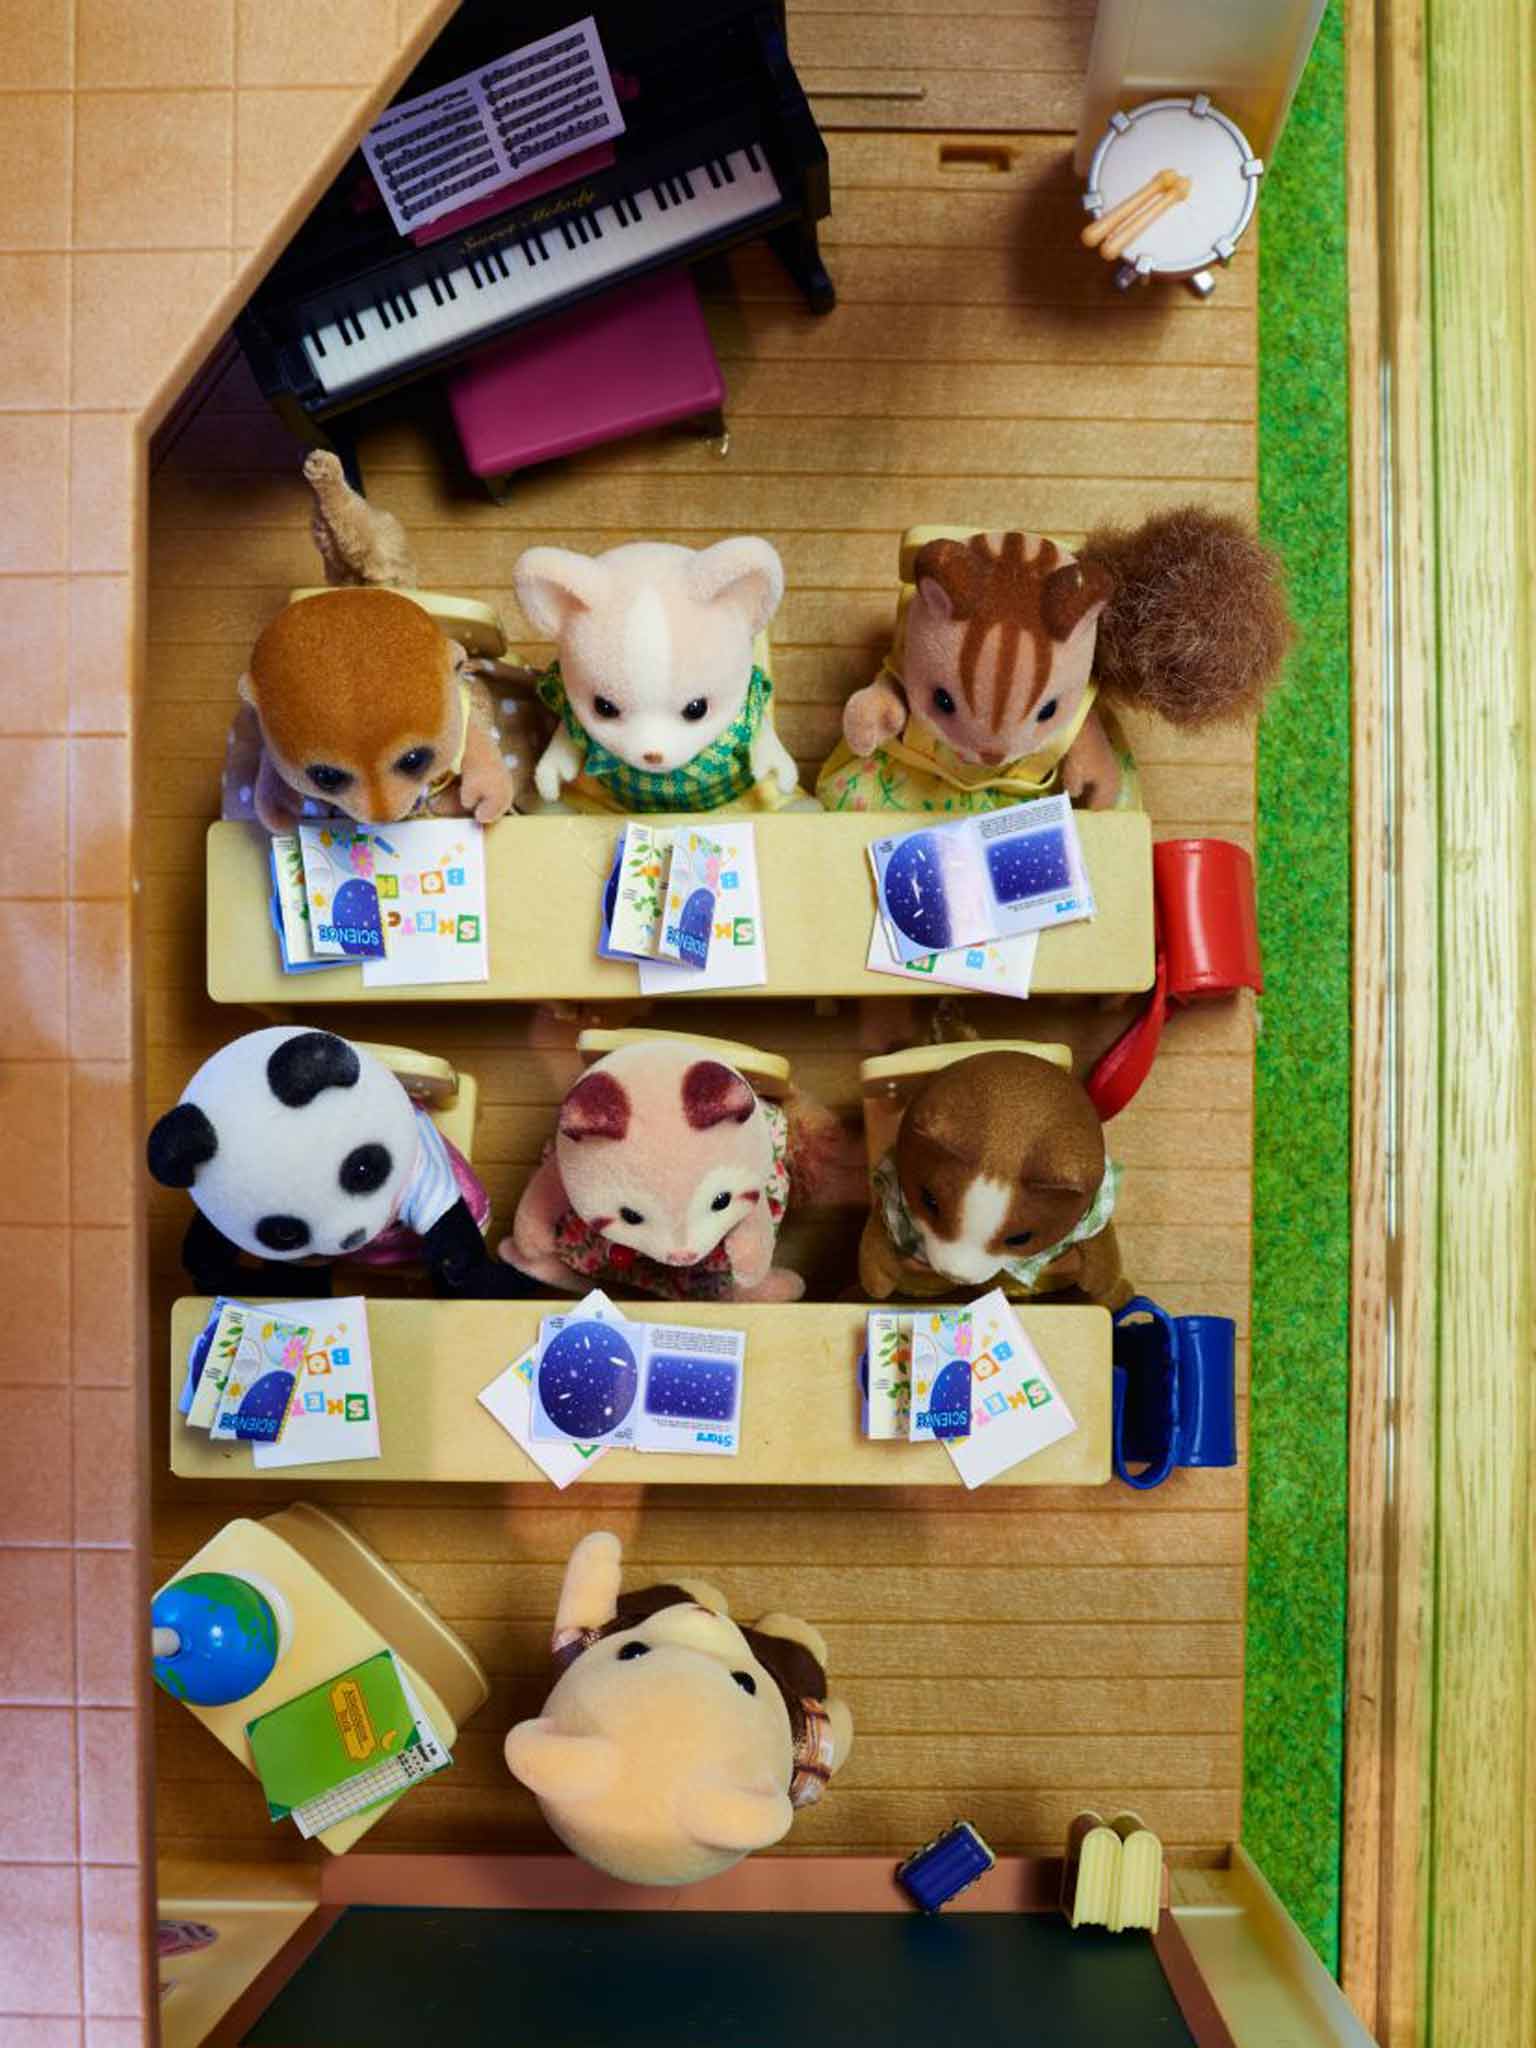 Sylvanian Families: How folksy ways and wholesome values captured a global  audience, The Independent